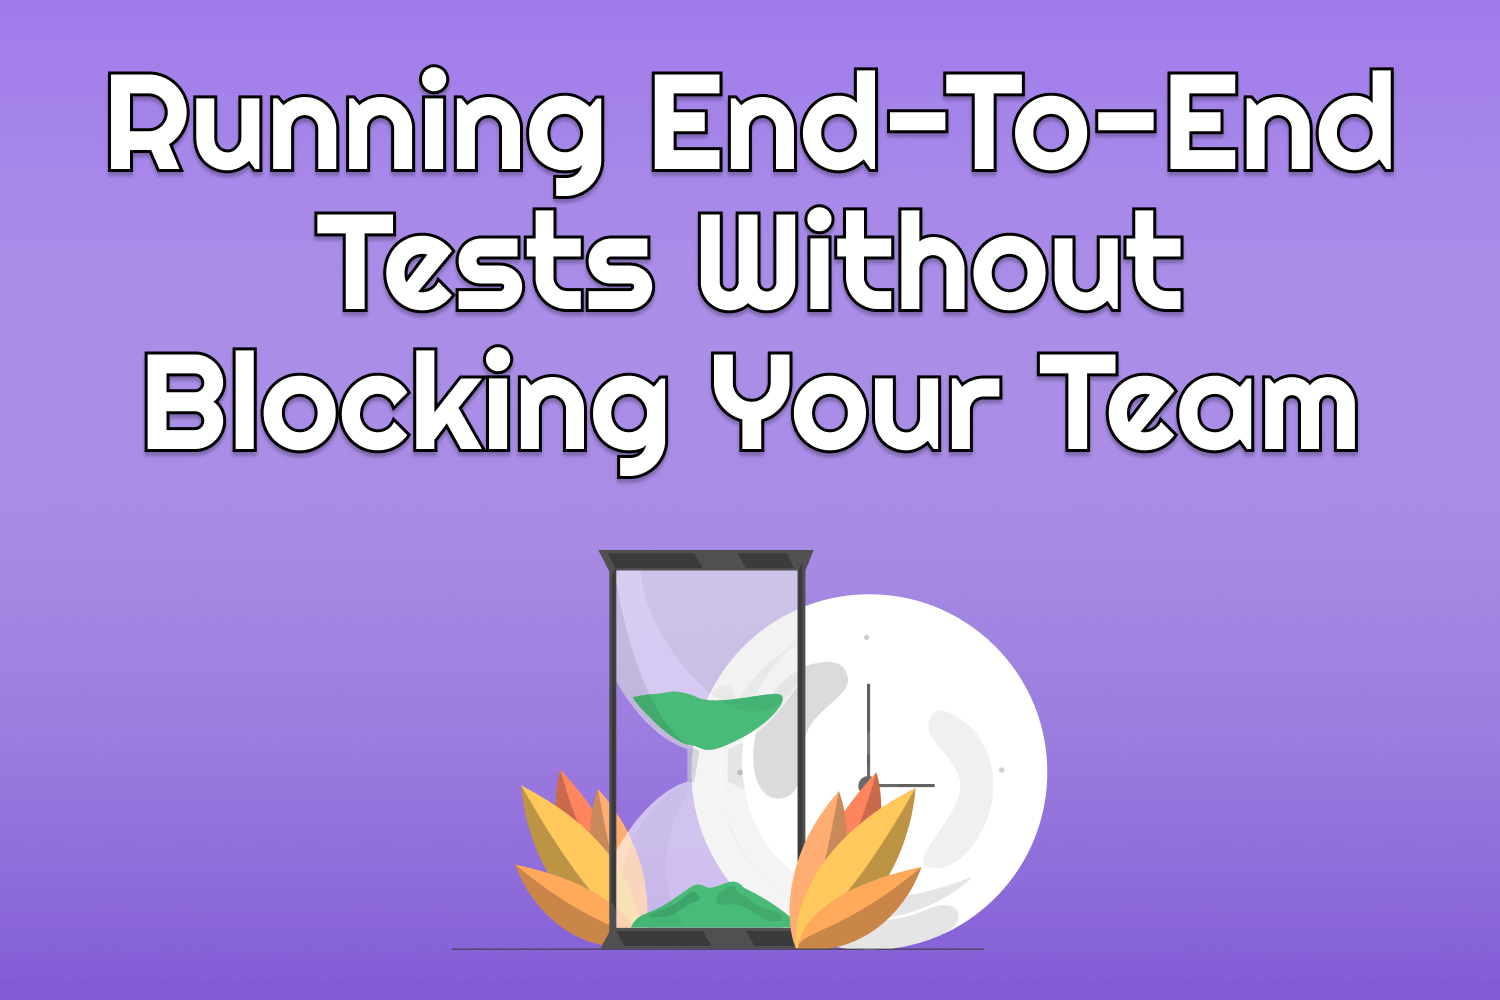 Running End-To-End Tests Without Blocking Your Team